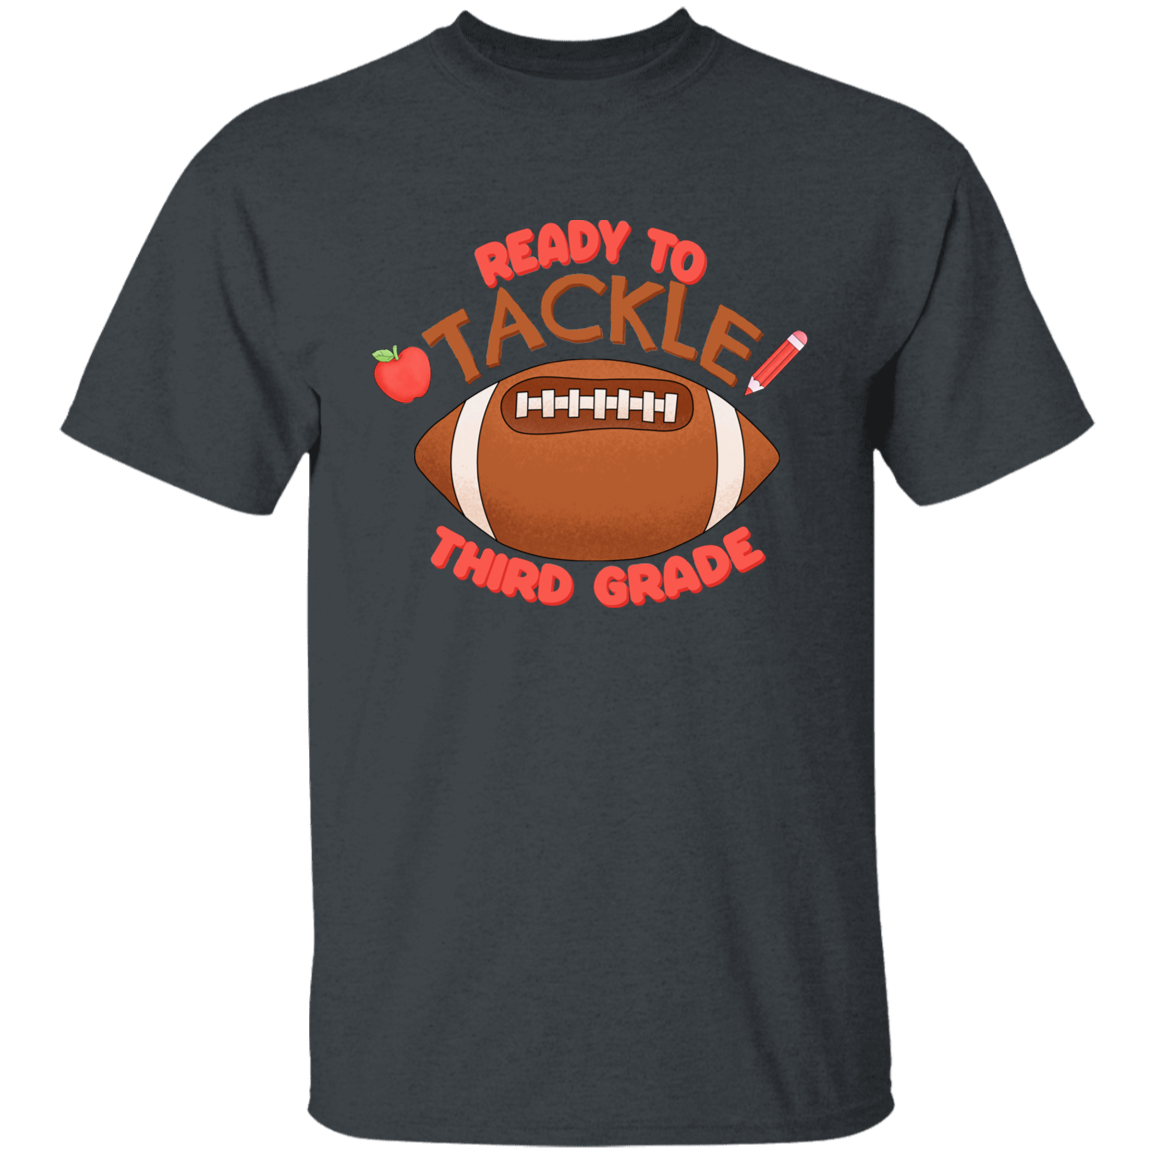 Ready to Tackle Third Grade Youth Cotton T-Shirt